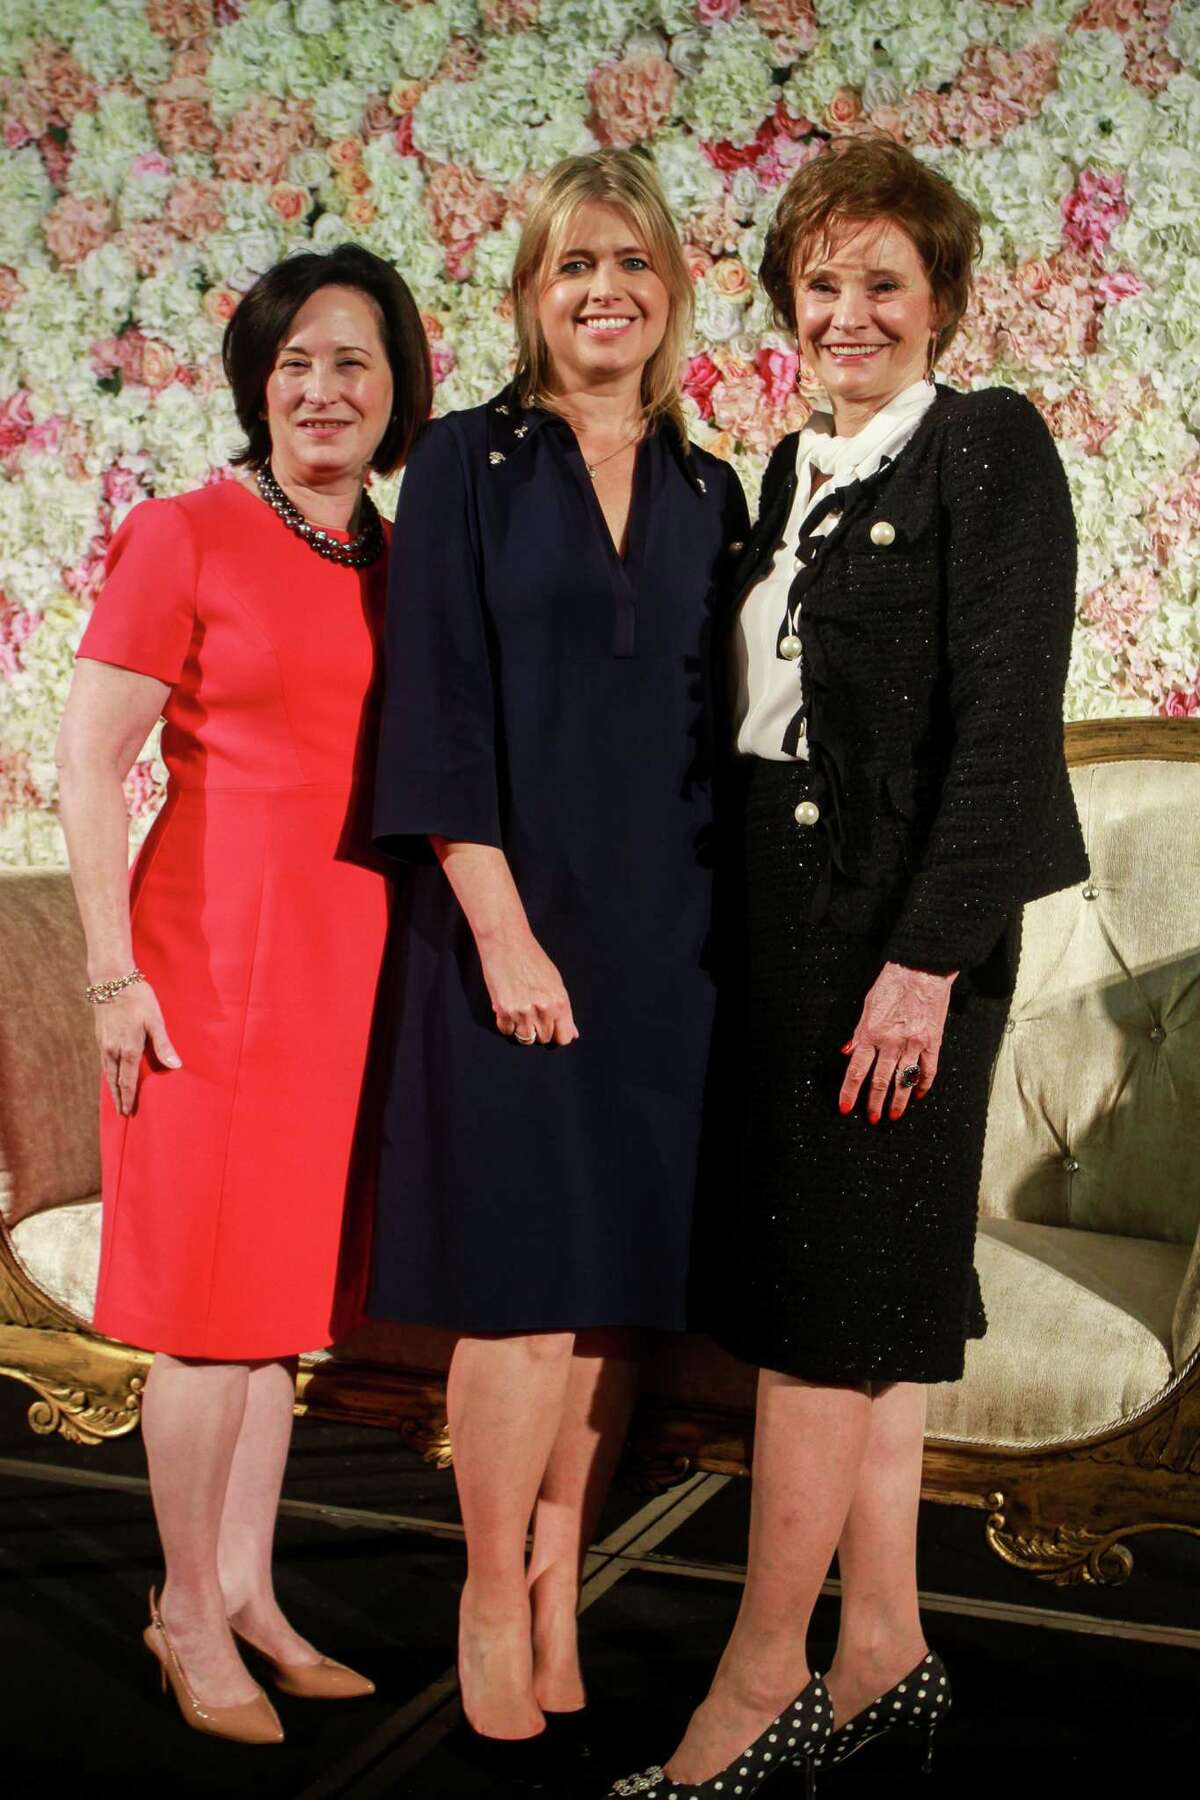 Anne Neeson, CEO of Memorial Hermann Foundation, from left, British designer Jenny Peckham, and chair Bobbie Nau at the Razzle Dazzle, Memorial Hermann's annual breast cancer luncheon.